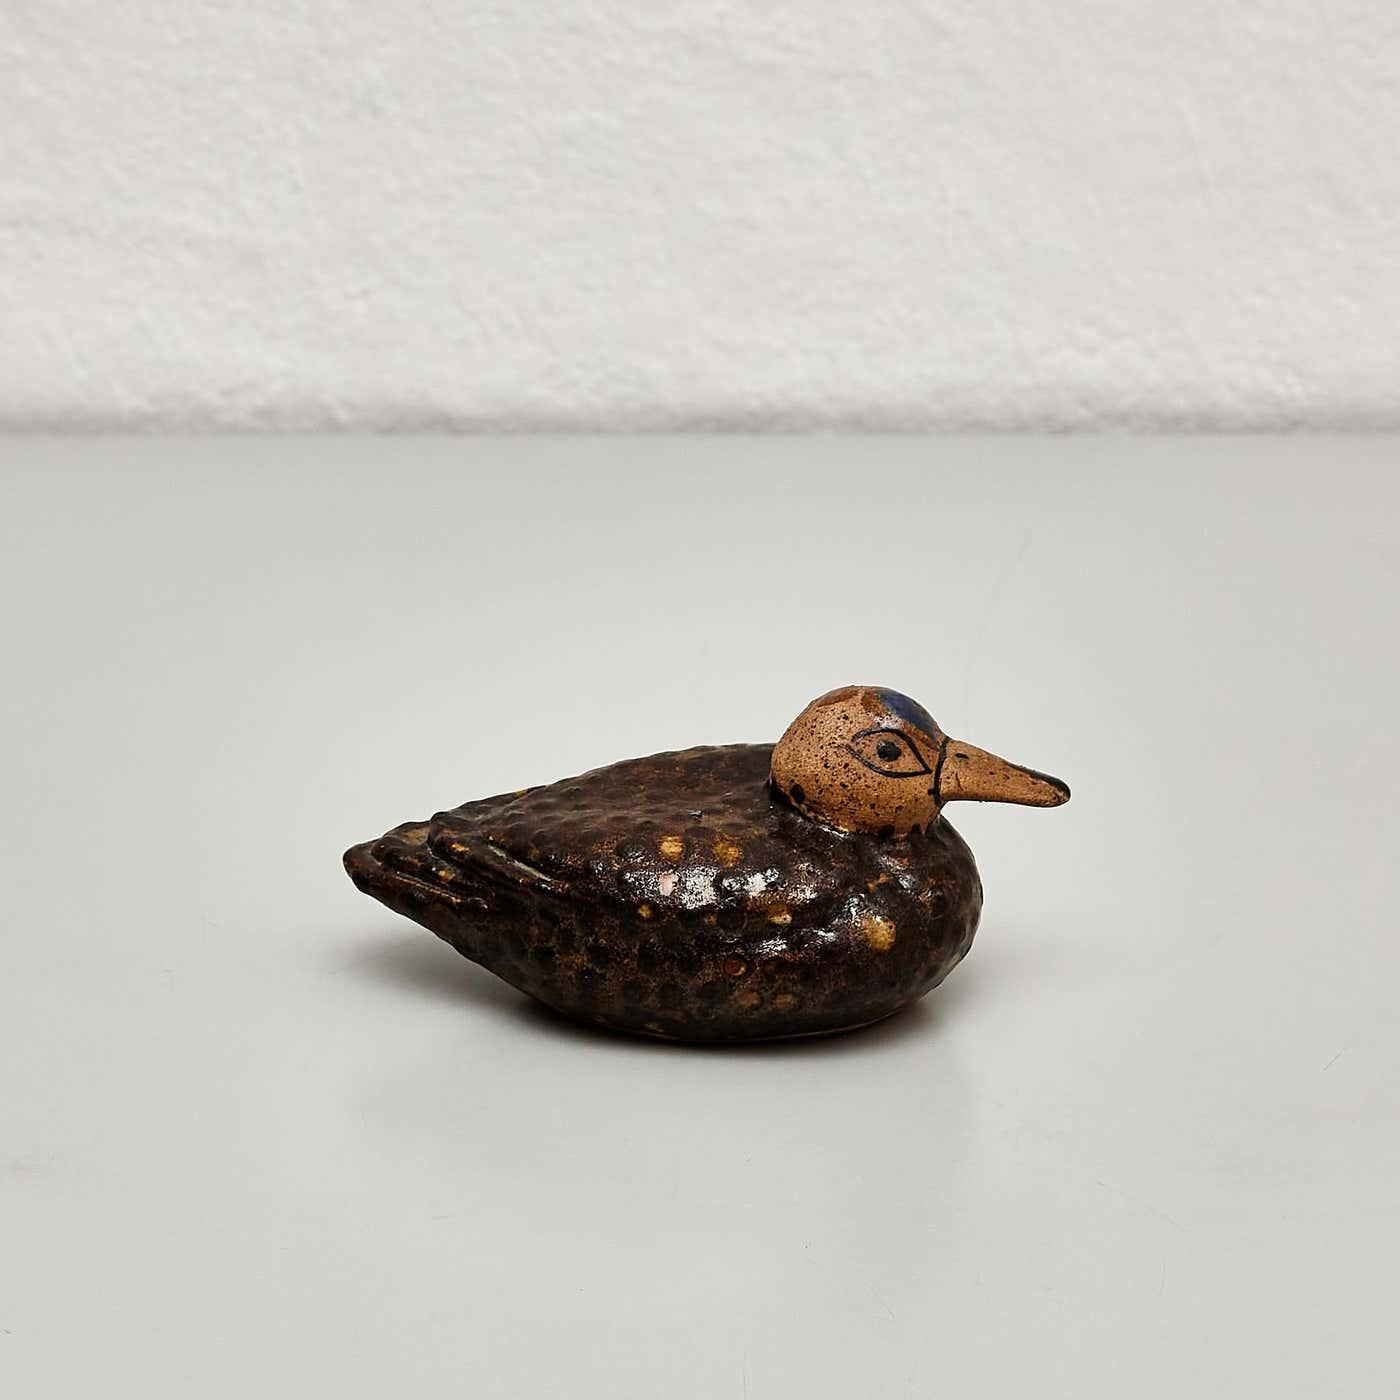 Charming Hand-Painted Ceramic Duck Sculpture - Naif Primitive Art, circa 1940 For Sale 2